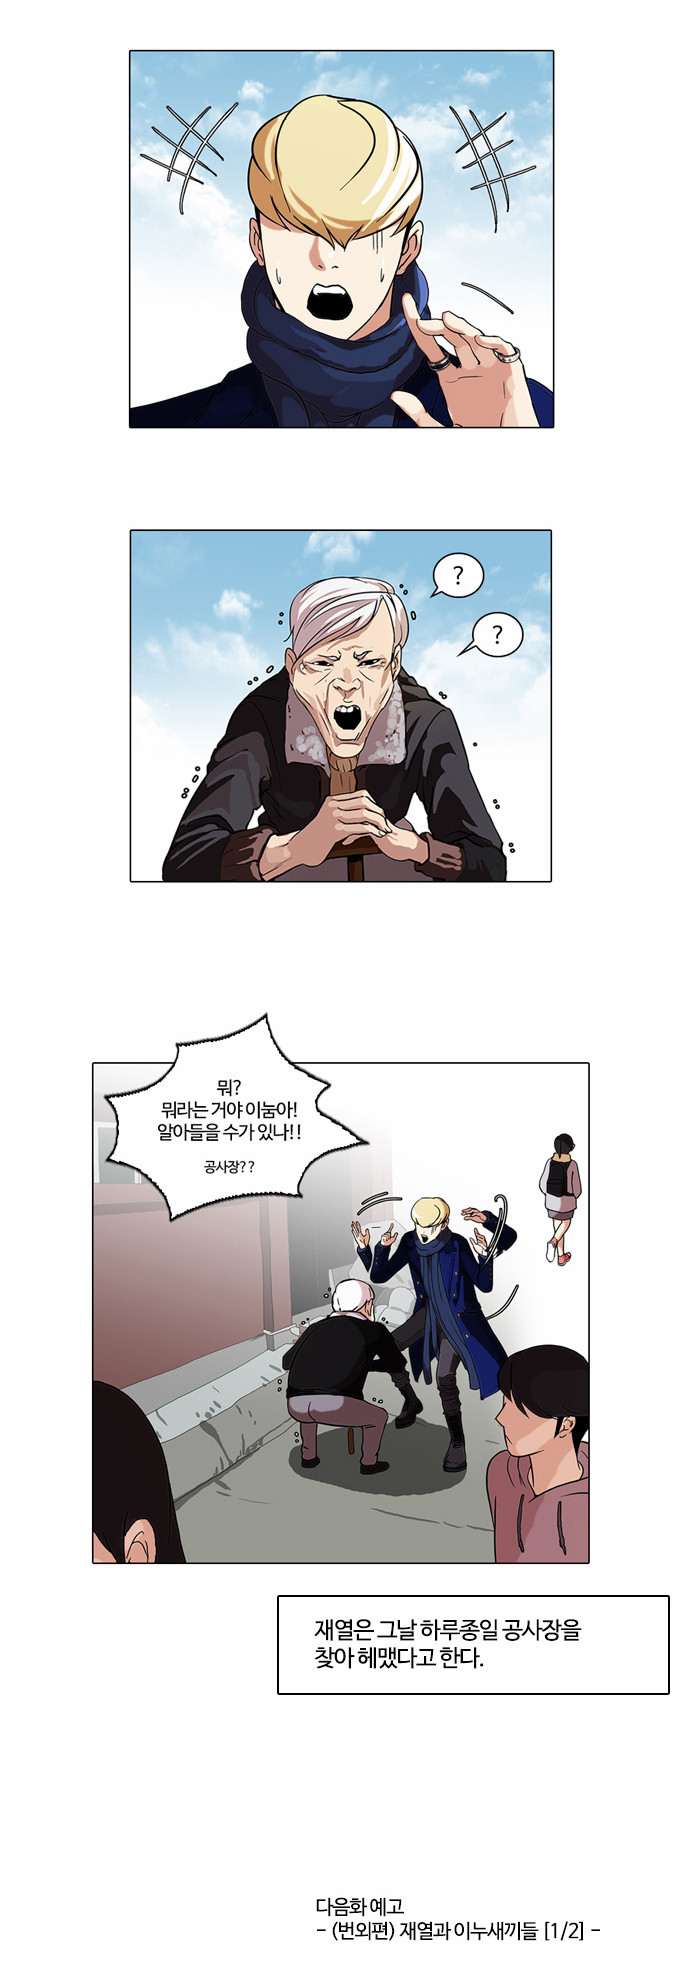 Lookism - Chapter 68 - Page 43